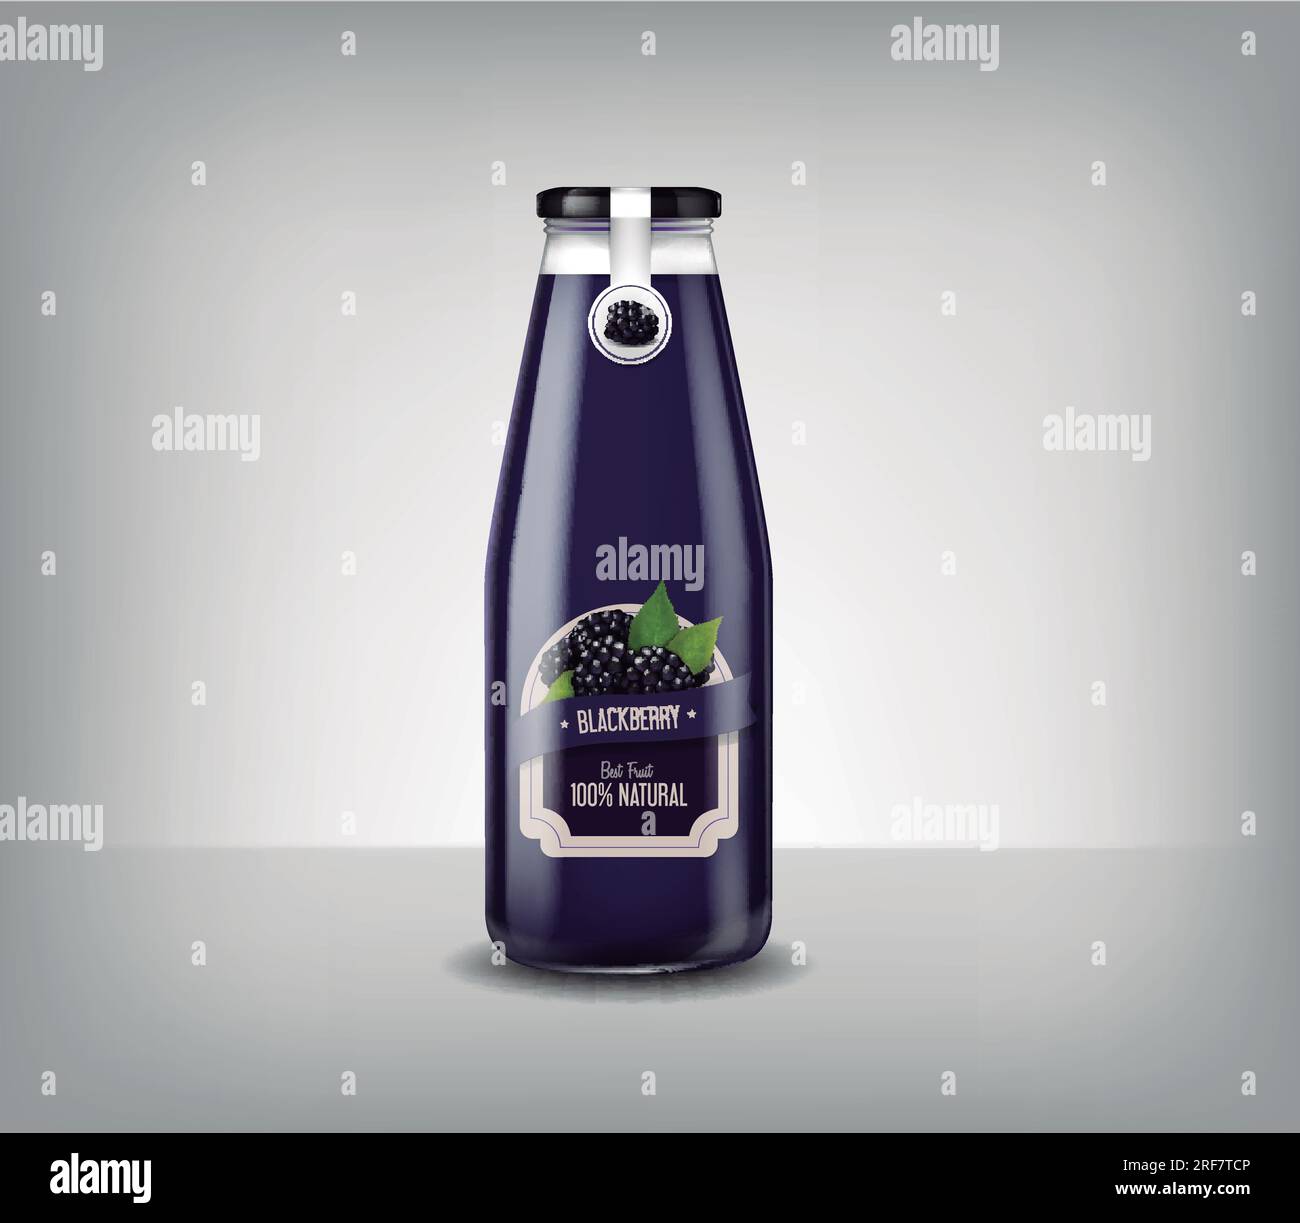 https://c8.alamy.com/comp/2RF7TCP/realistic-glass-bottle-of-blueberry-juice-drink-isolated-2RF7TCP.jpg